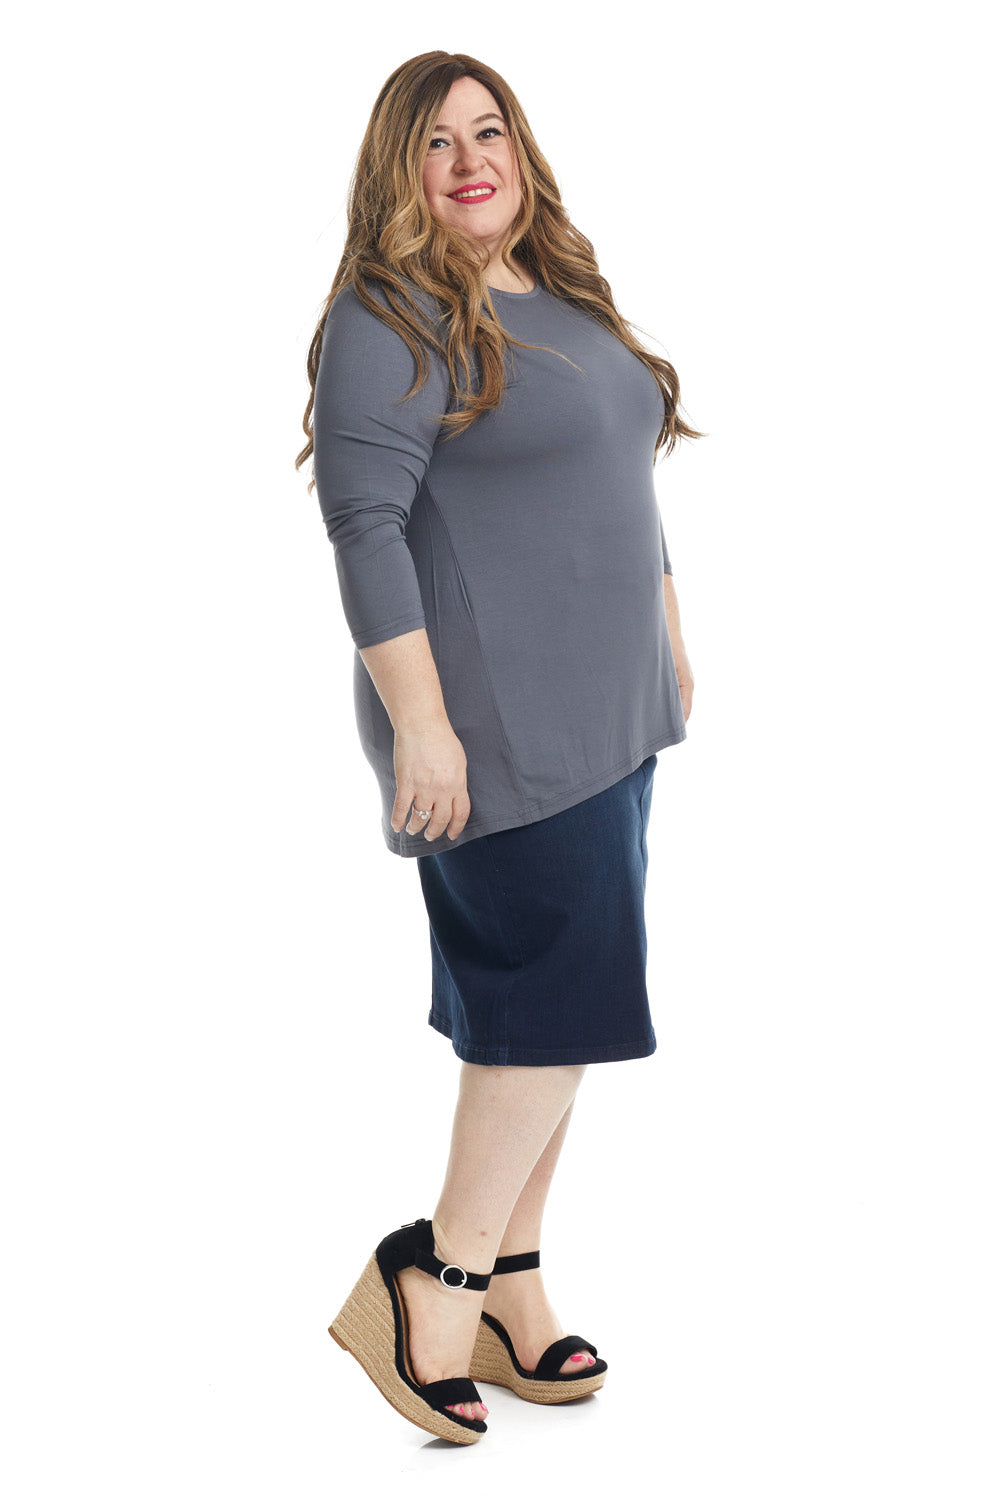 modest blue straight plus size denim jean skirt for women with pockets and belt loops